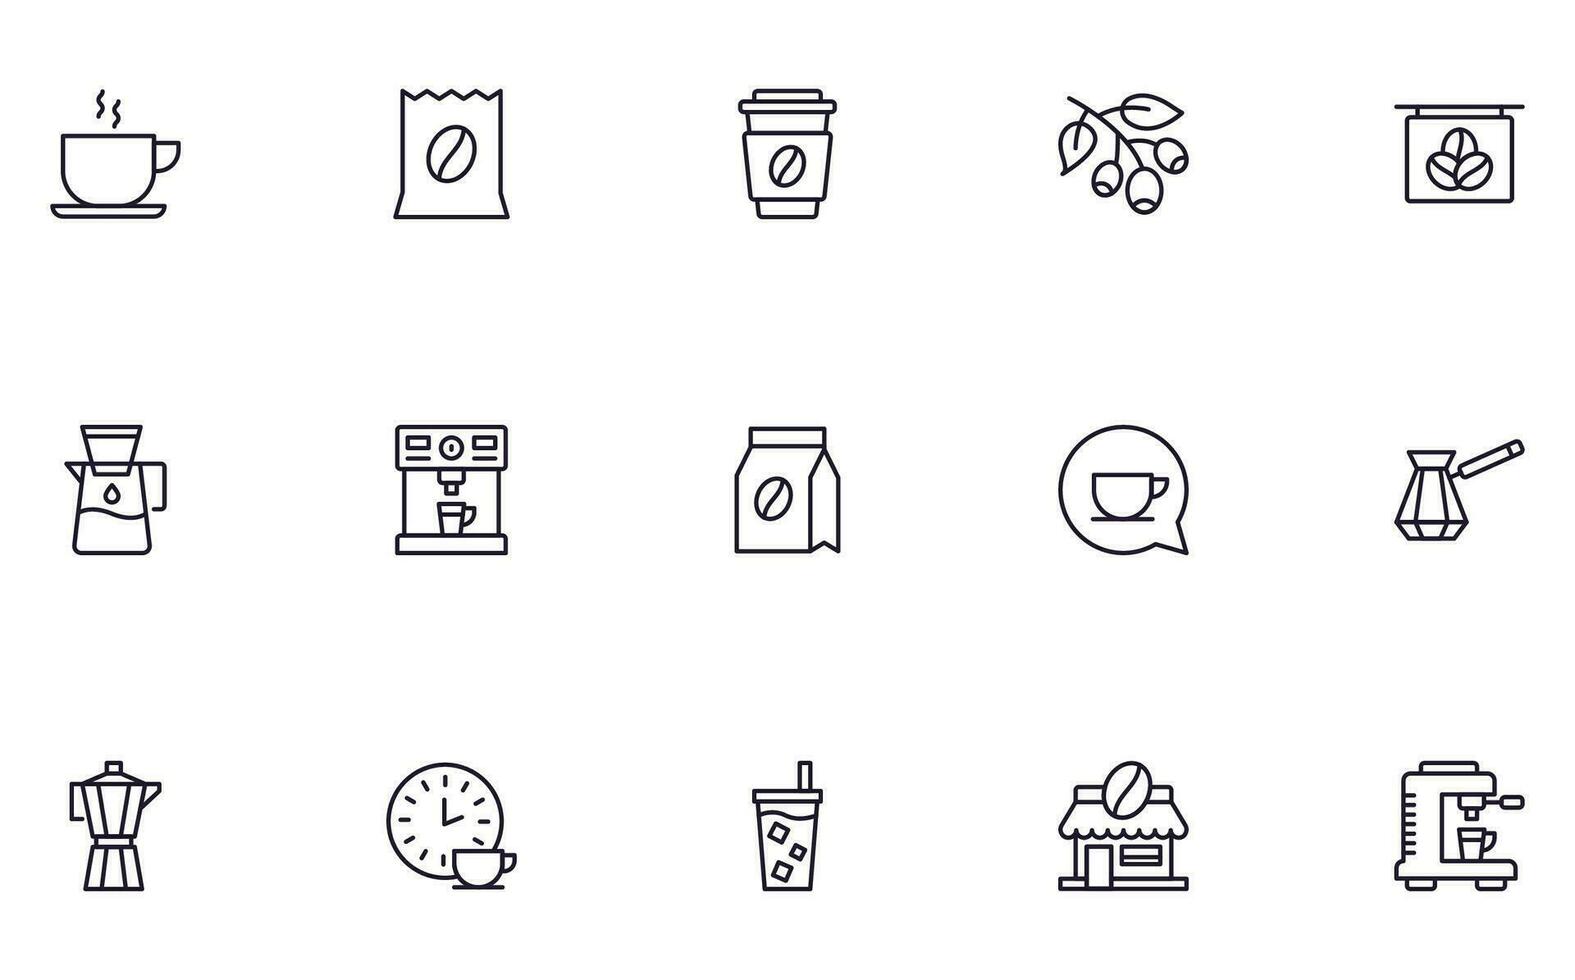 Coffee concept. Coffee line icon set. Collection of vector signs in trendy flat style for web sites, internet shops and stores, books and flyers. Premium quality icons isolated on white background